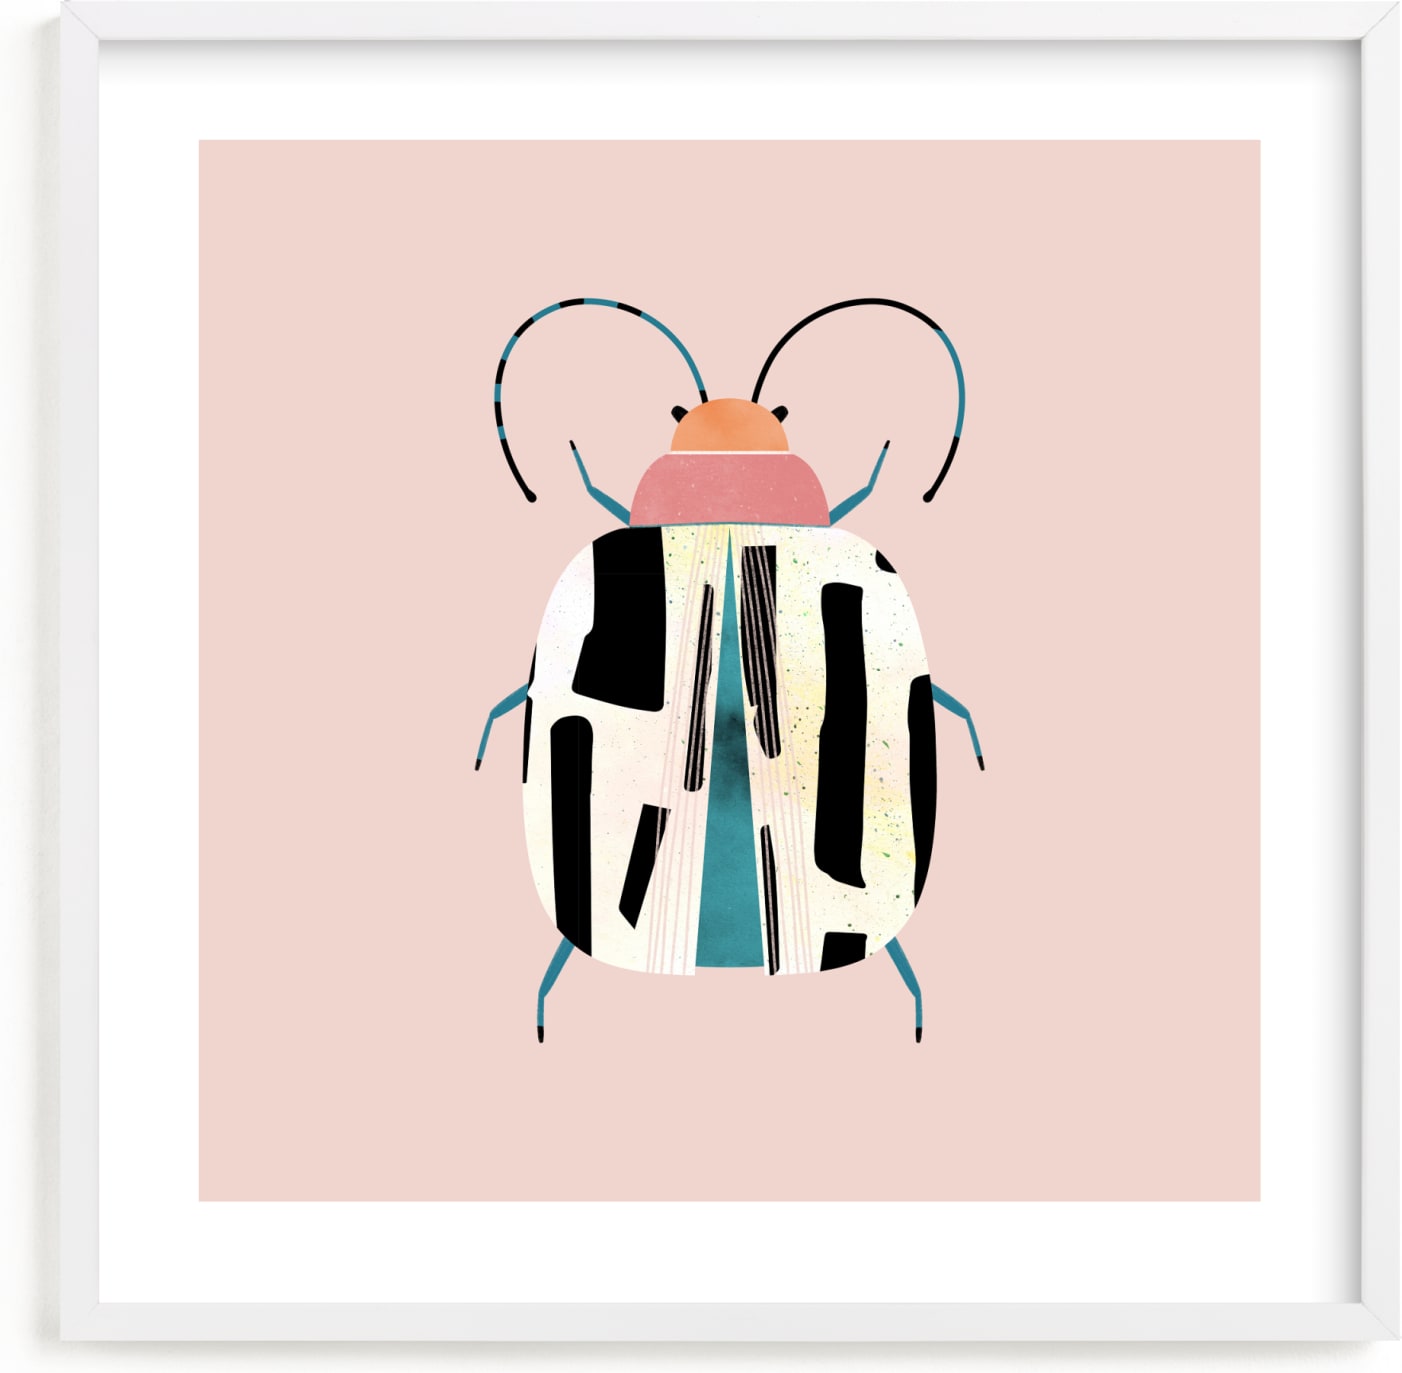 This is a pink kids wall art by Anna Clement called Little Beetle.